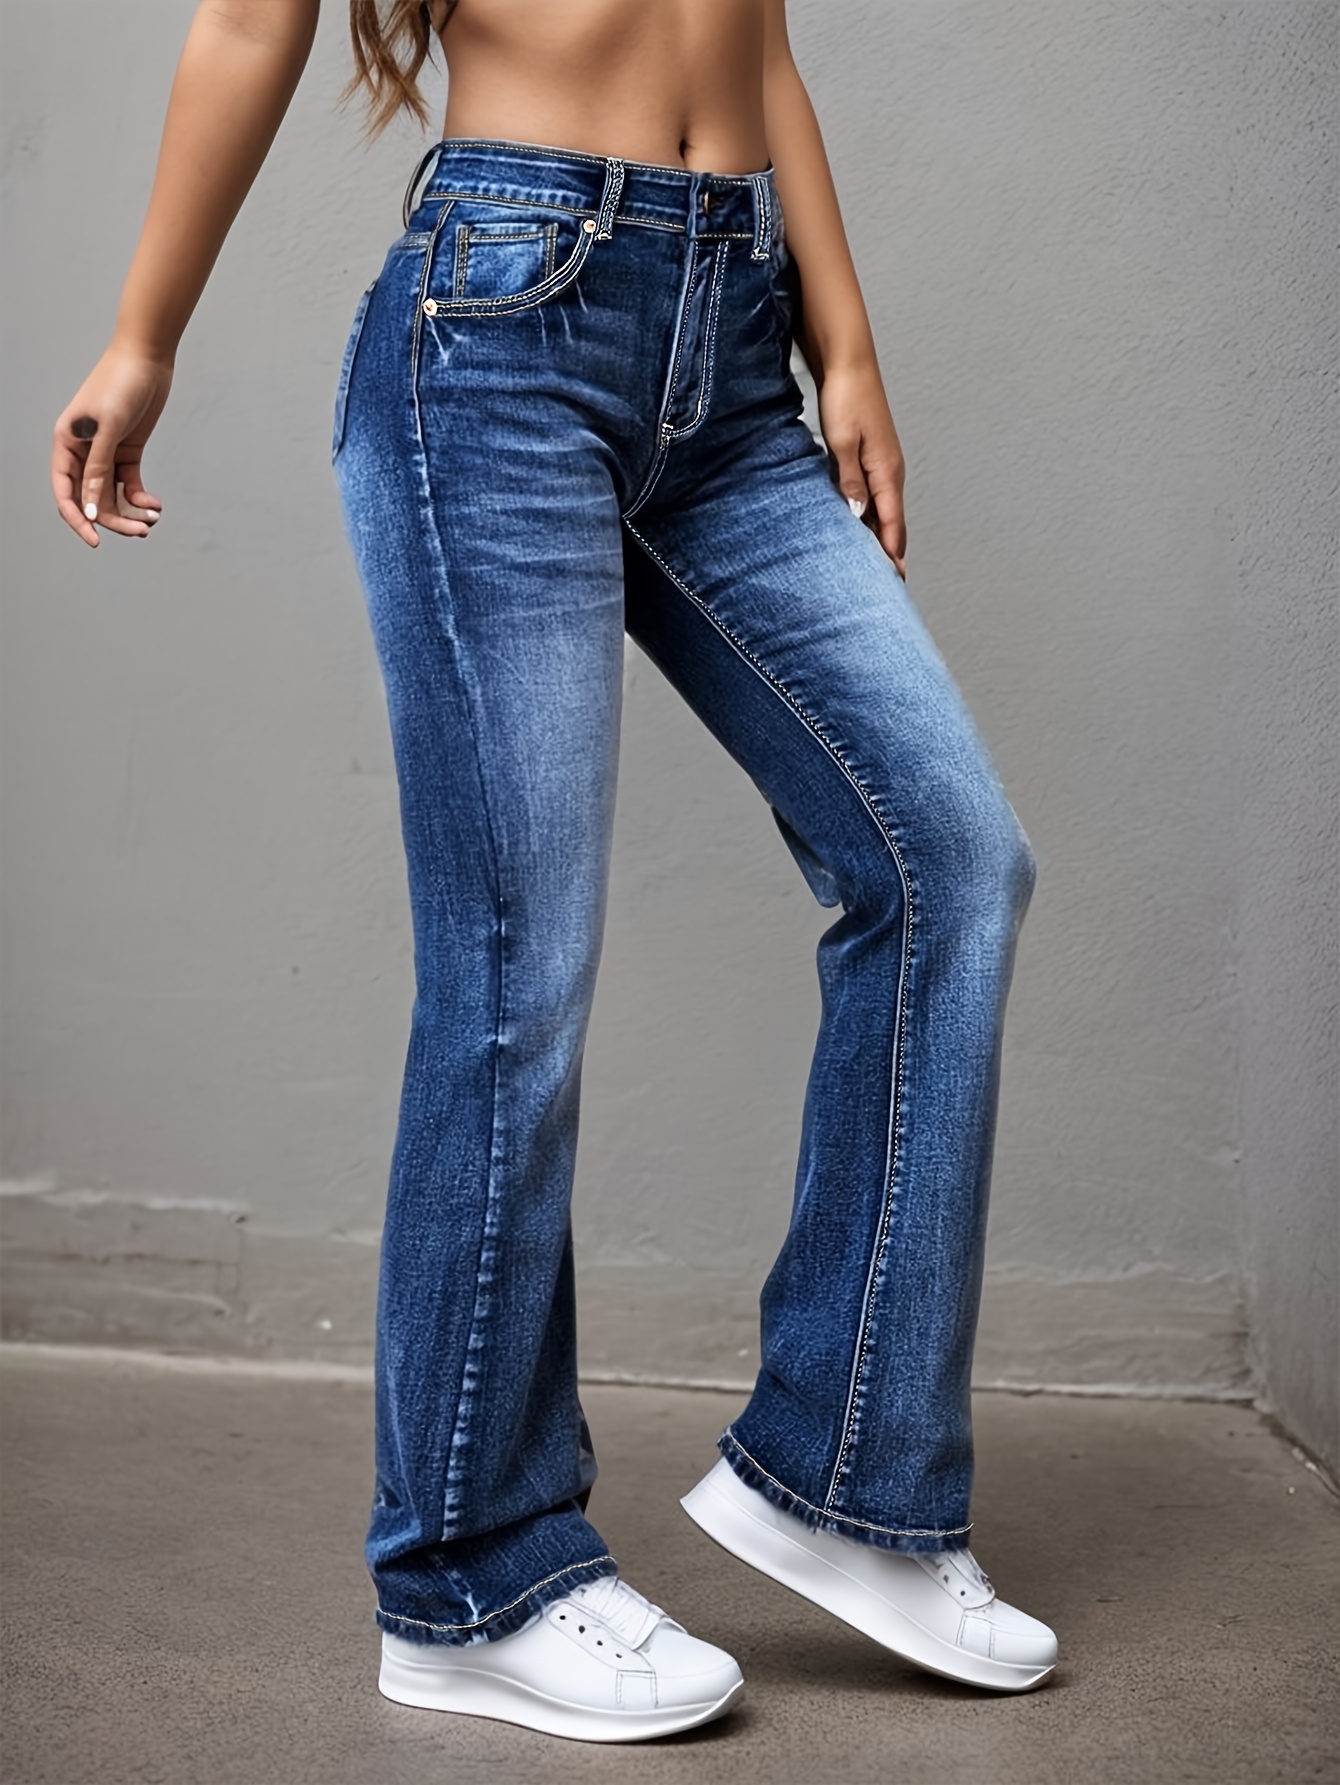 blue water ripple embossed flare jeans, high waist high stretch washed denim trousers, women's denim jeans & clothing deep blue 4